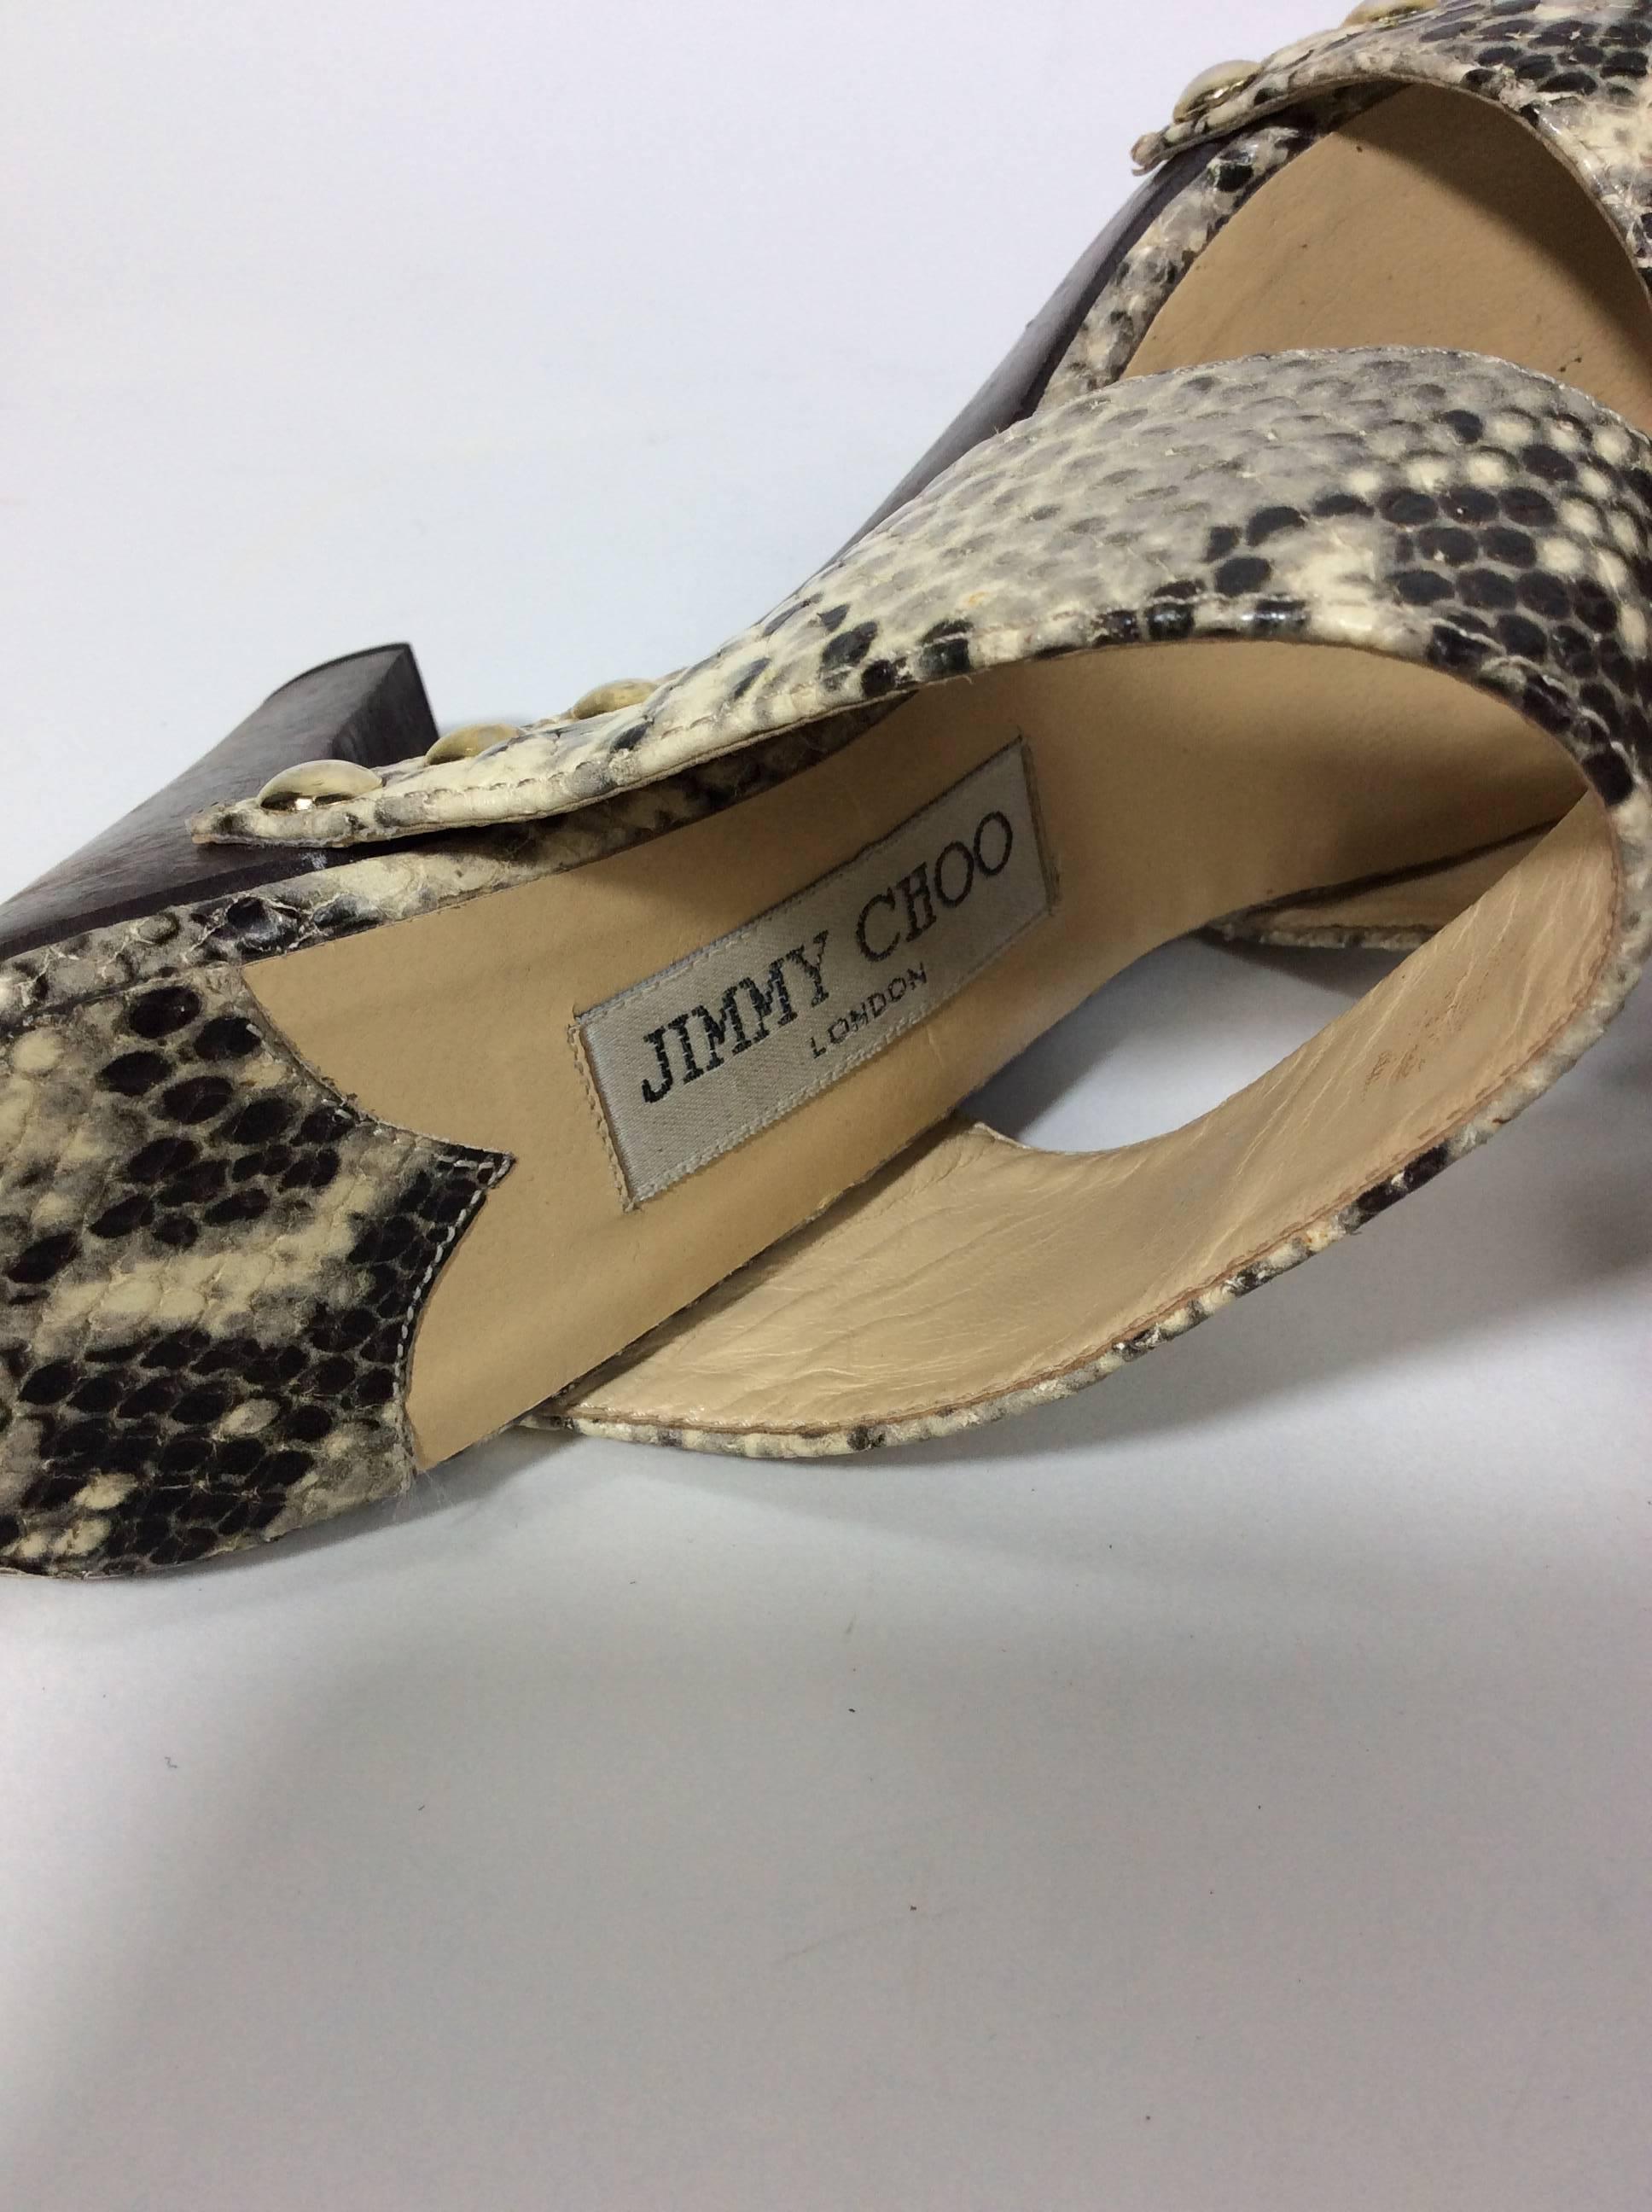 Grey and Brown Snakeskin Slides
4 inch heel with a 1 inch platform
2.75 inch sole width
Snakeskin straps with silver rivets on each side 
Brown wooden sole and heel
Tan leather lining
Size 37 (equates to a US 7)